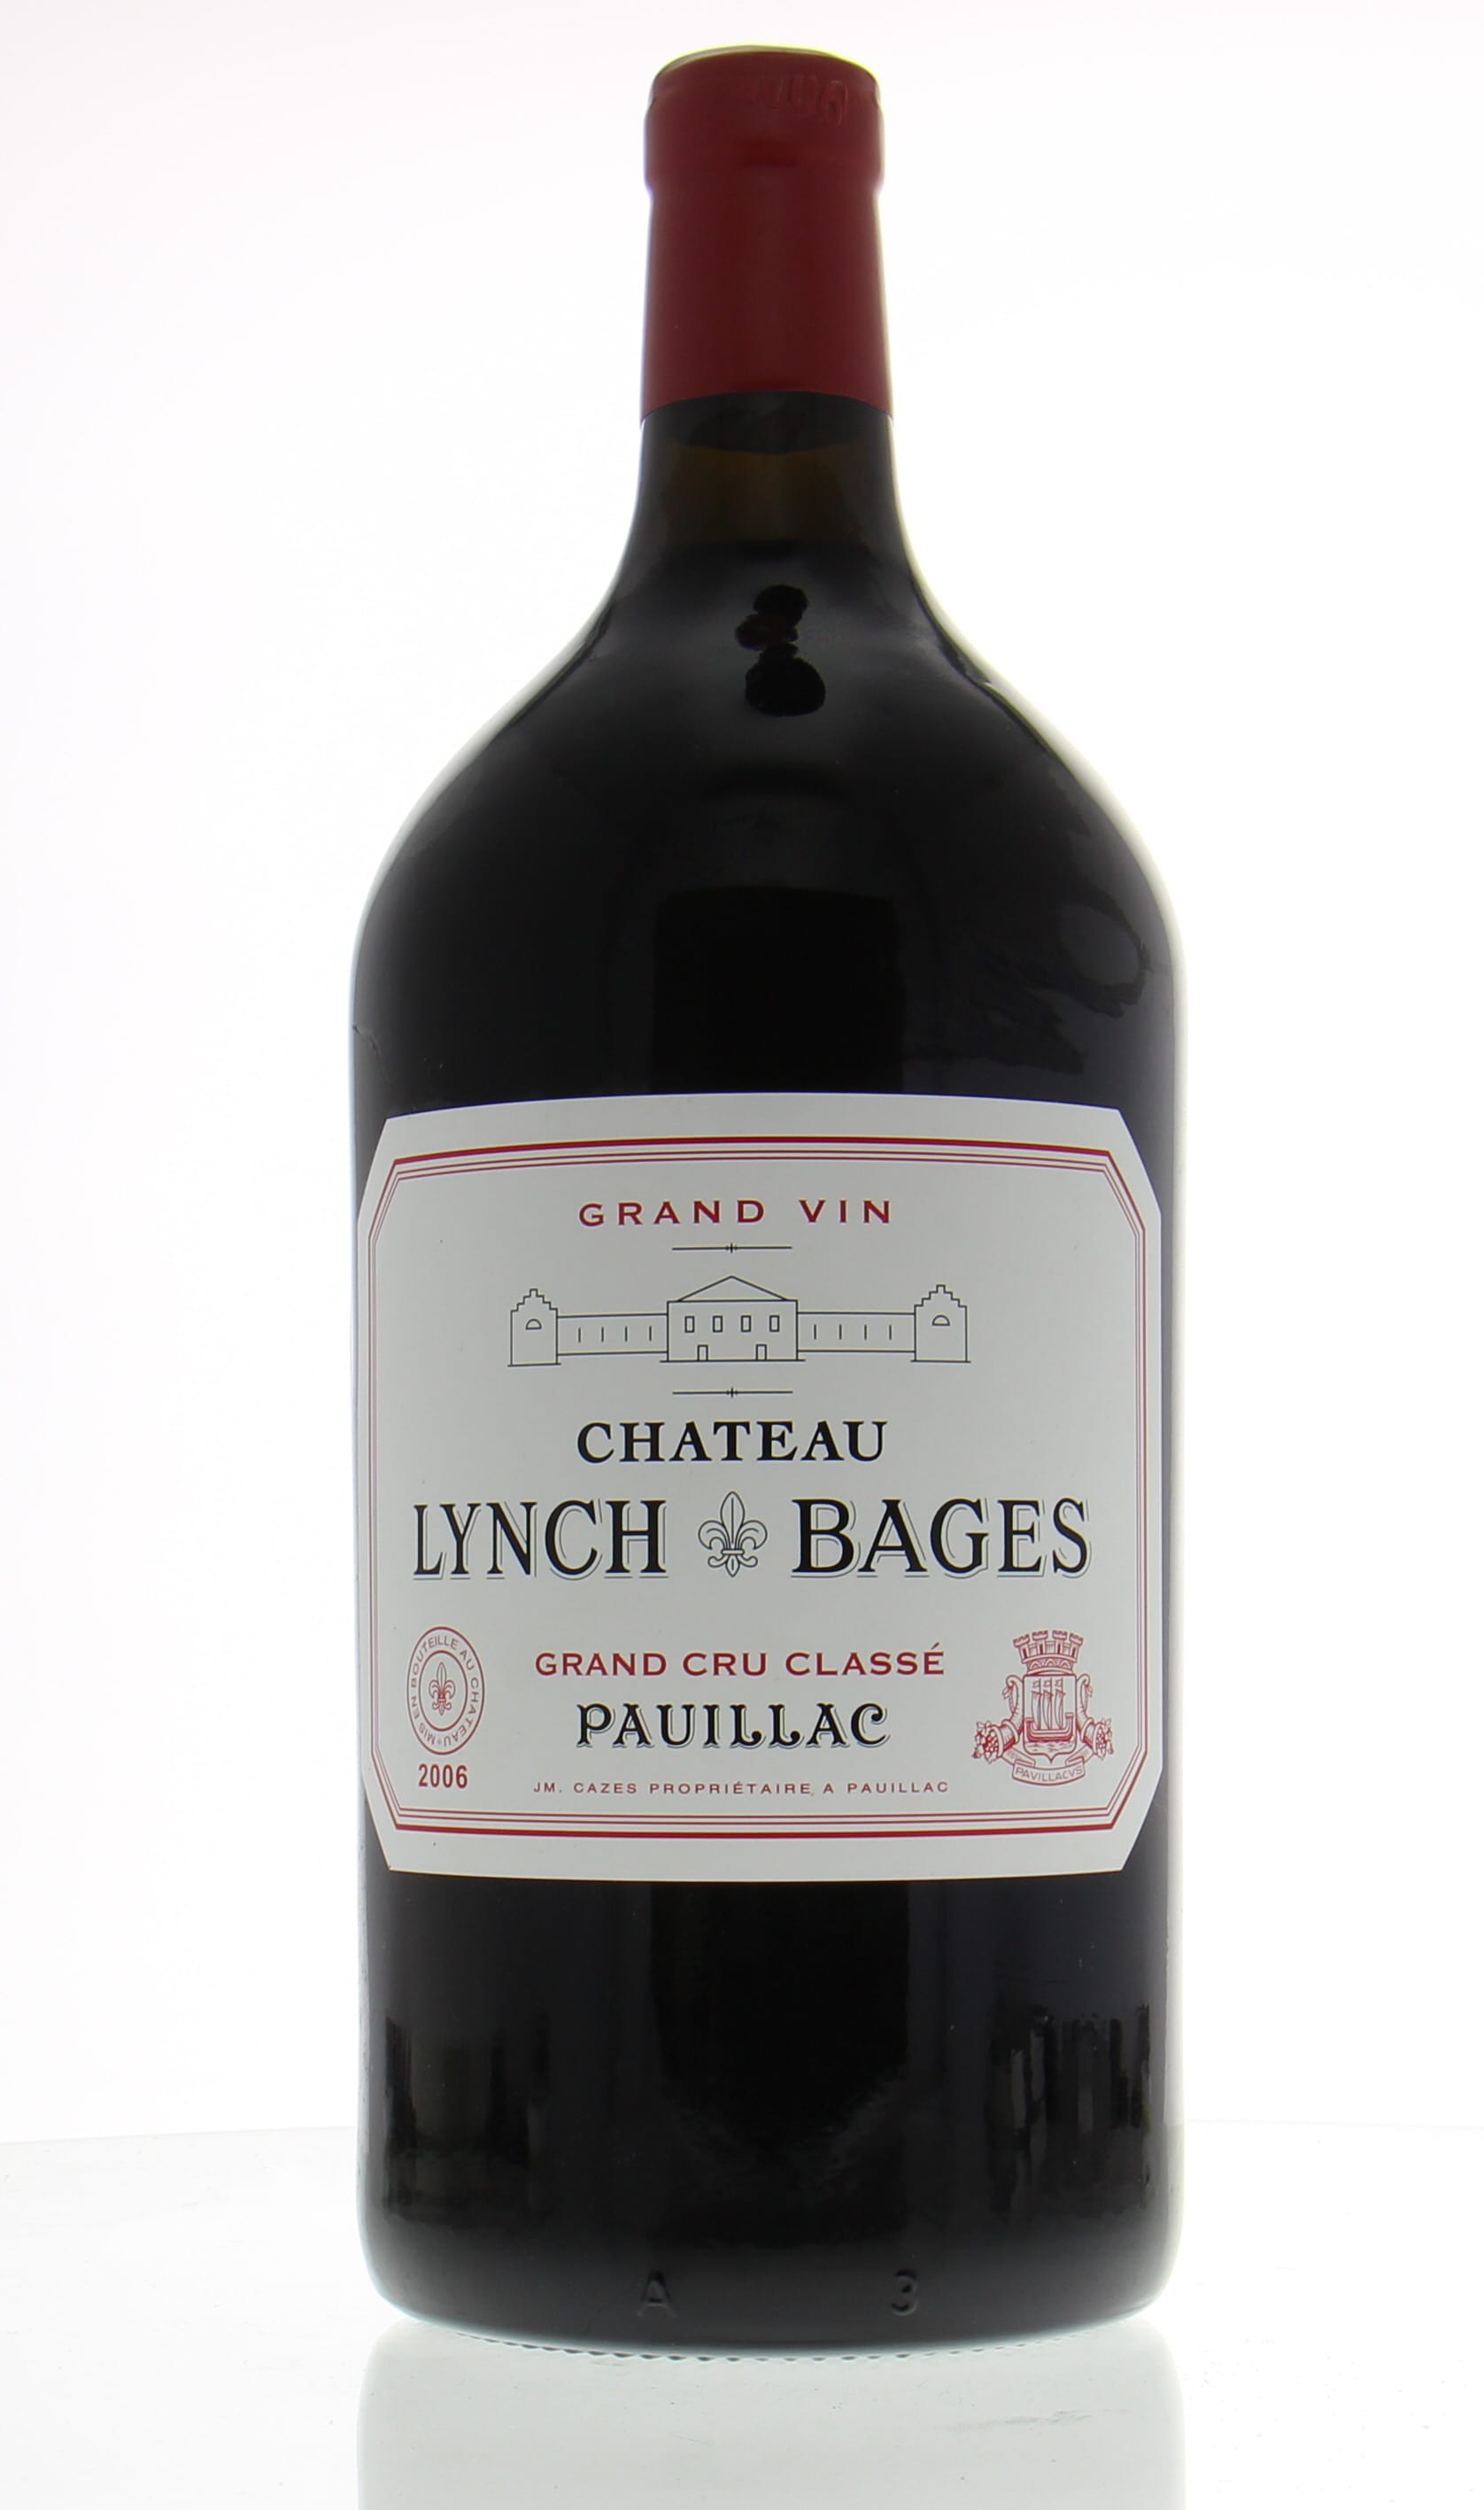 Chateau Lynch Bages - Chateau Lynch Bages 2006 Perfect